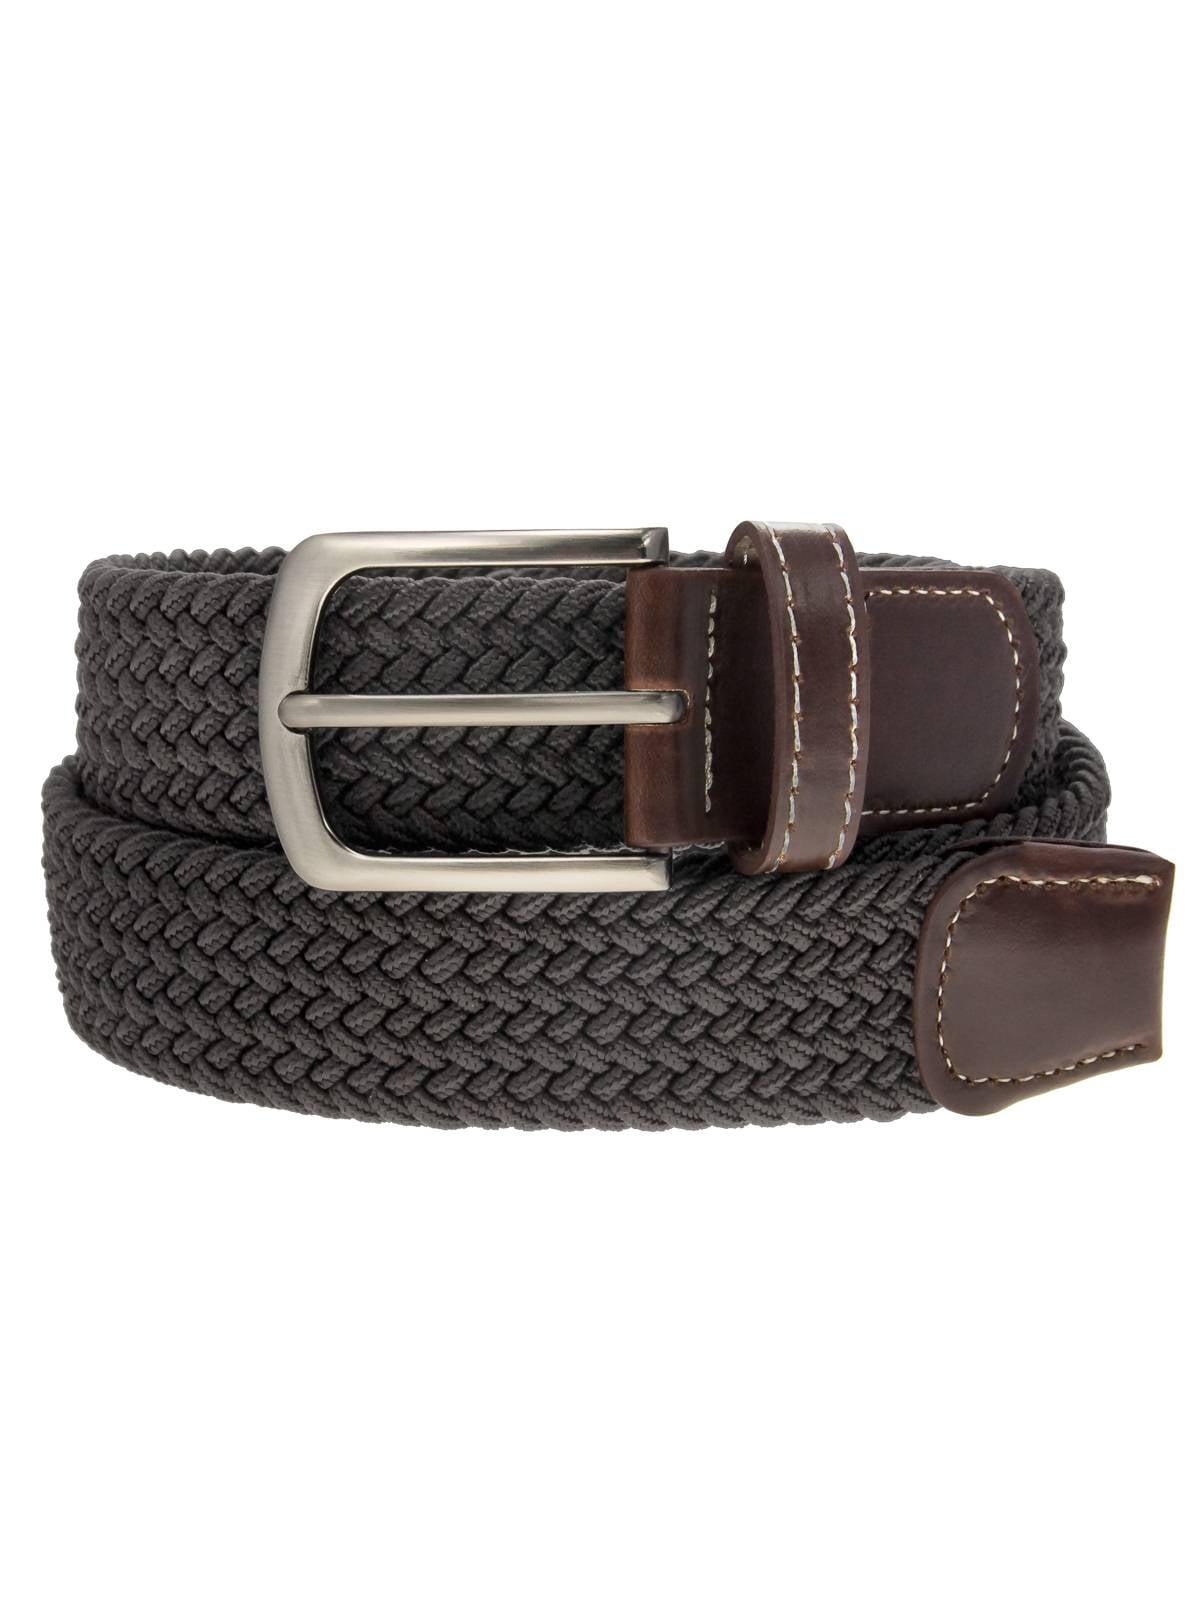 DG Hill Unisex Braided Belt with Elastic Faux Leather, Small, 27-45 ...